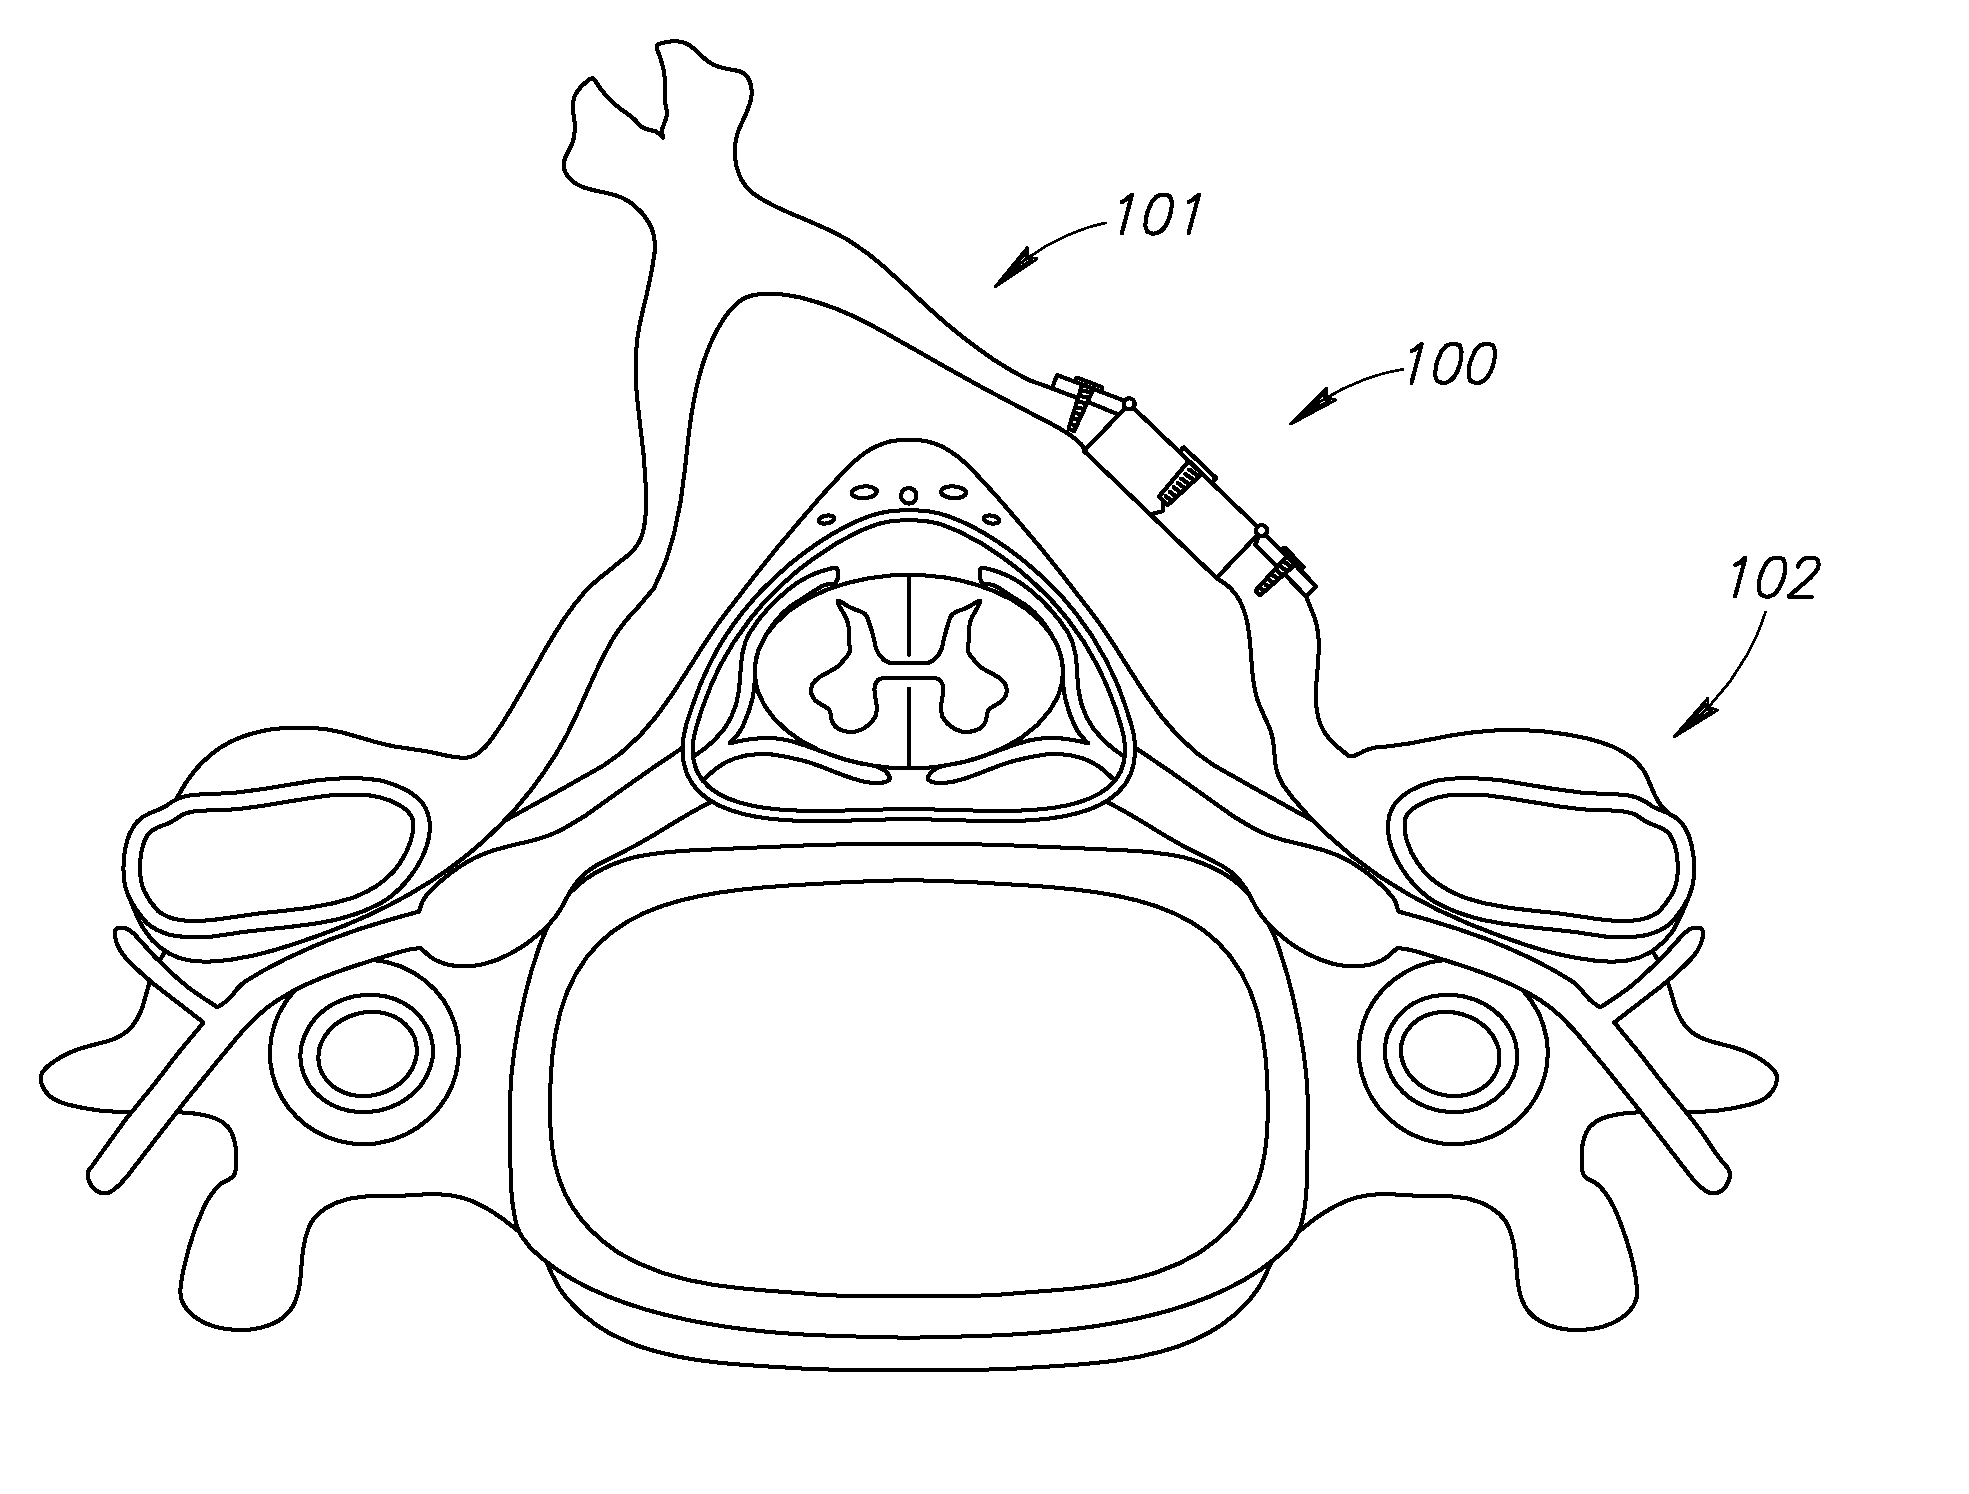 Device for expandable spinal laminoplasty